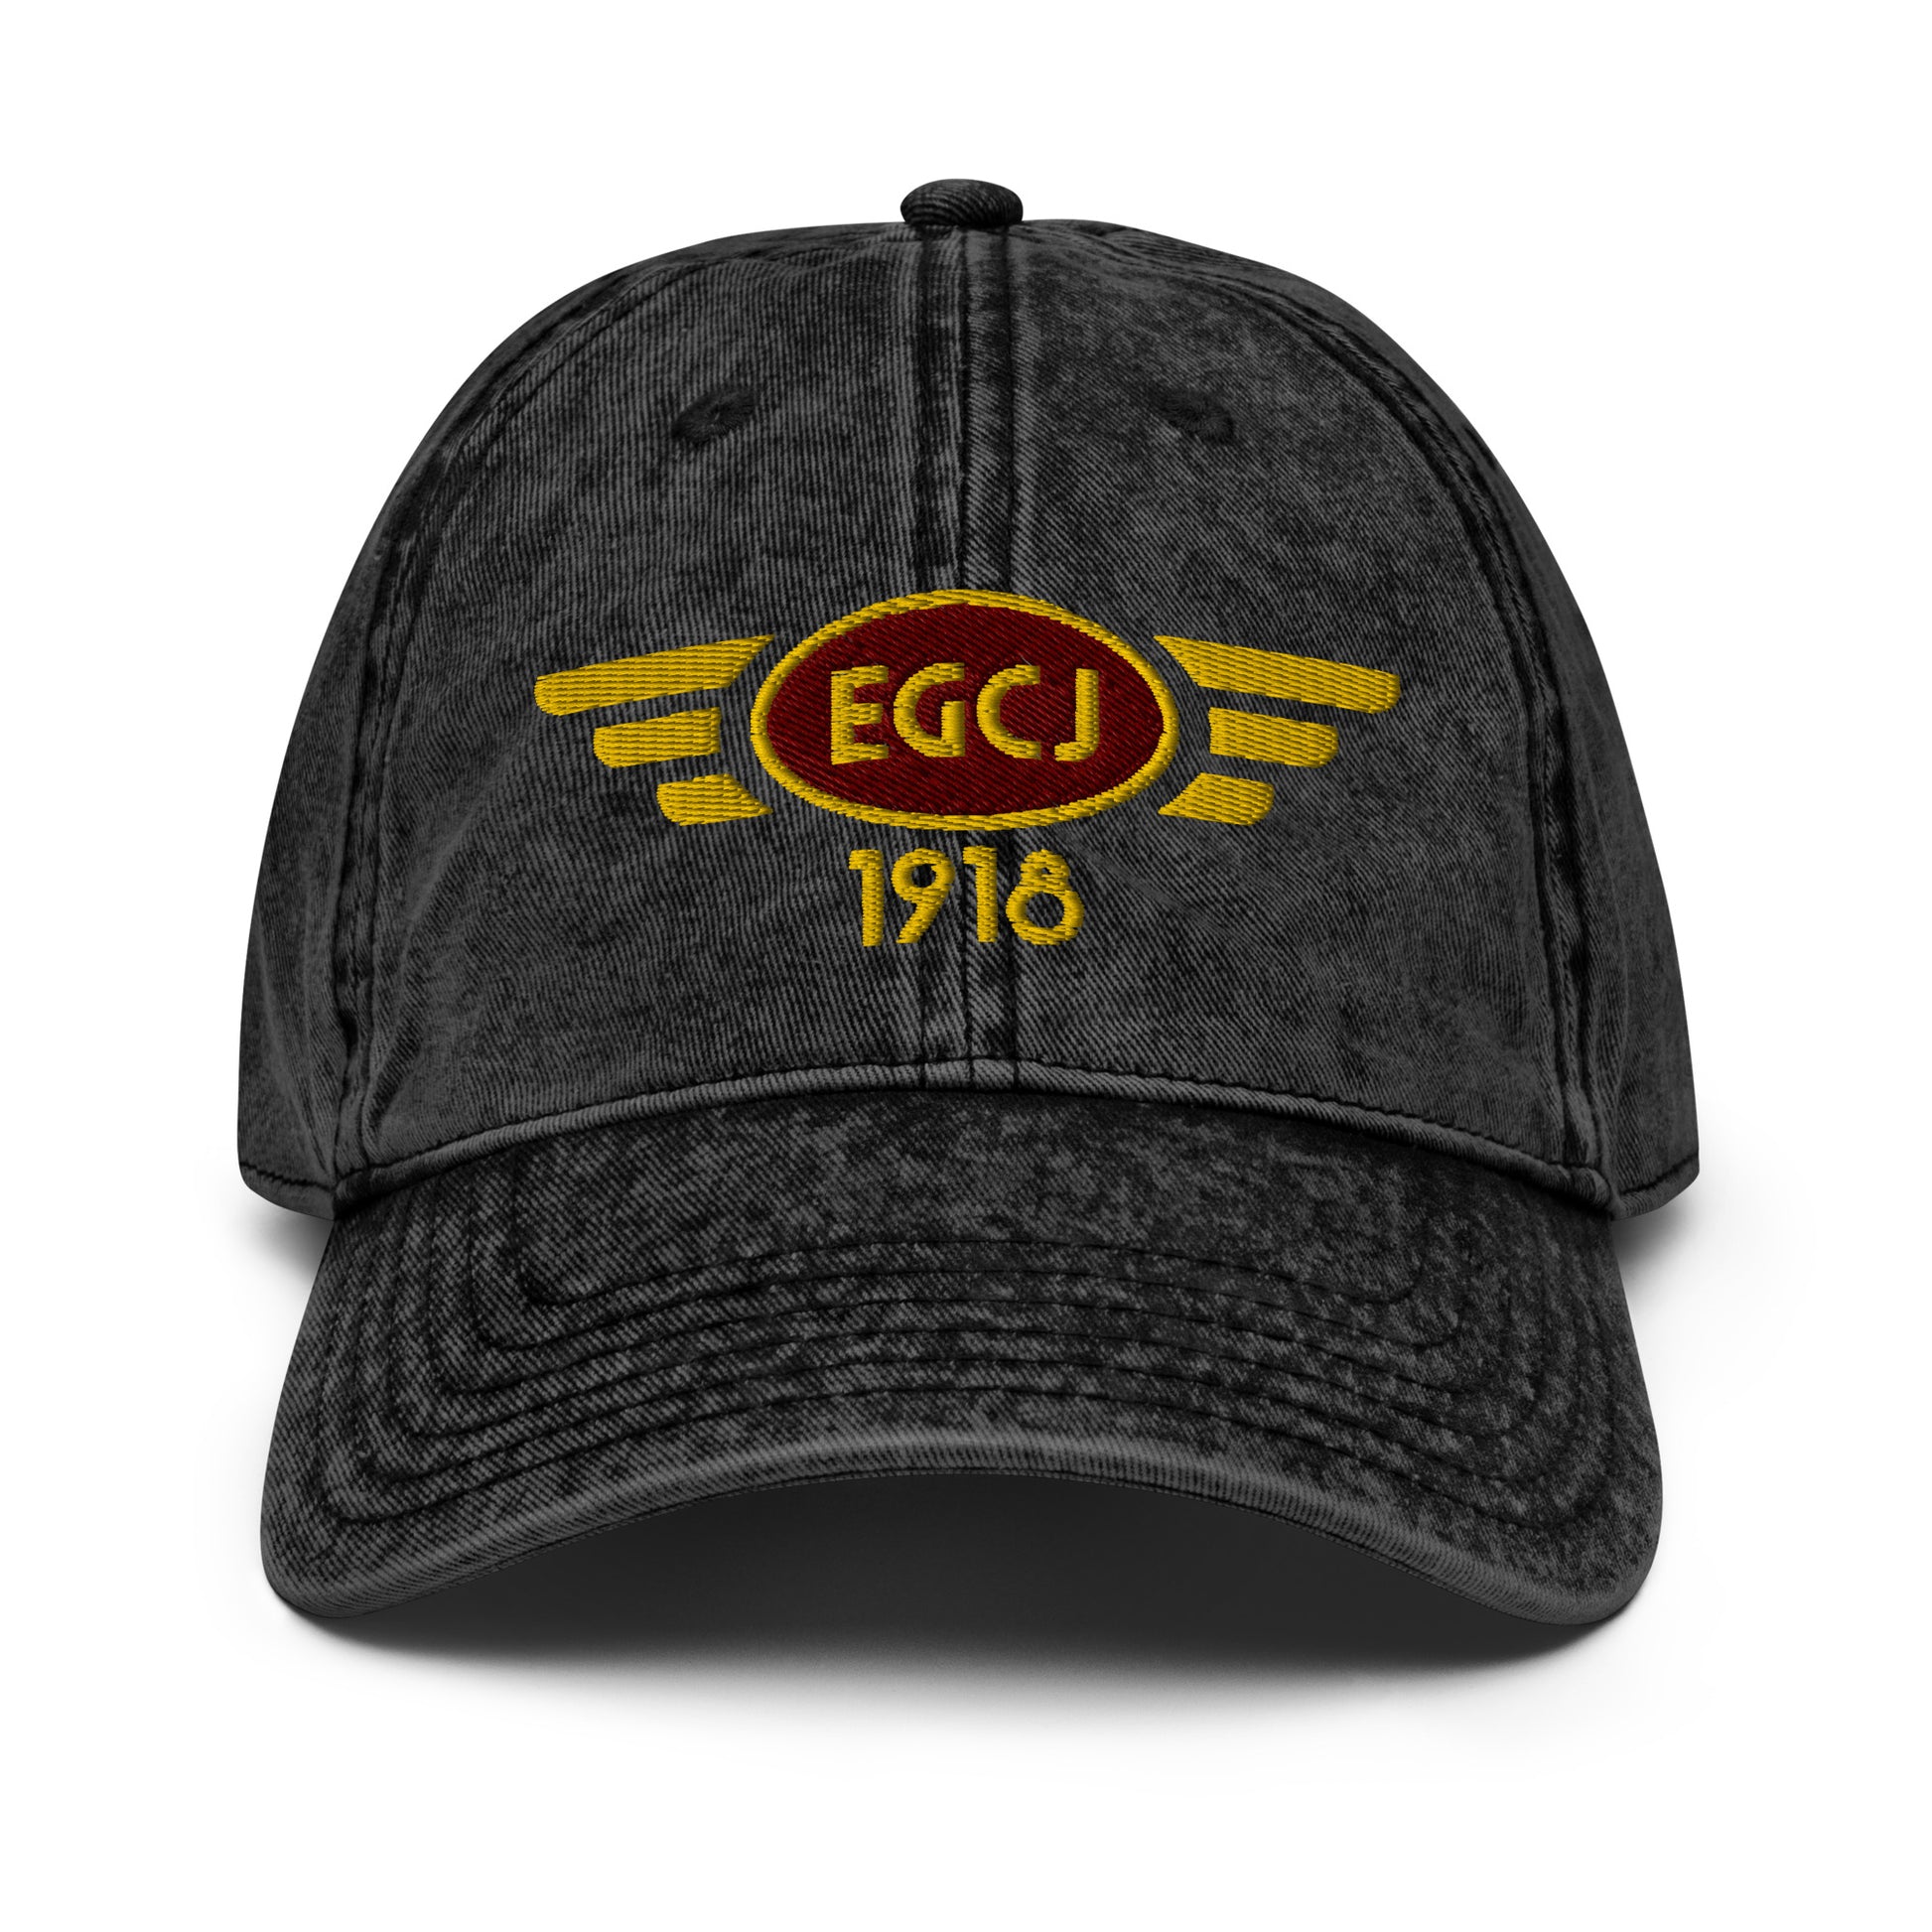 Black cotton twill baseball cap with embroidered vintage style aviation logo for Sherburn Airfield.